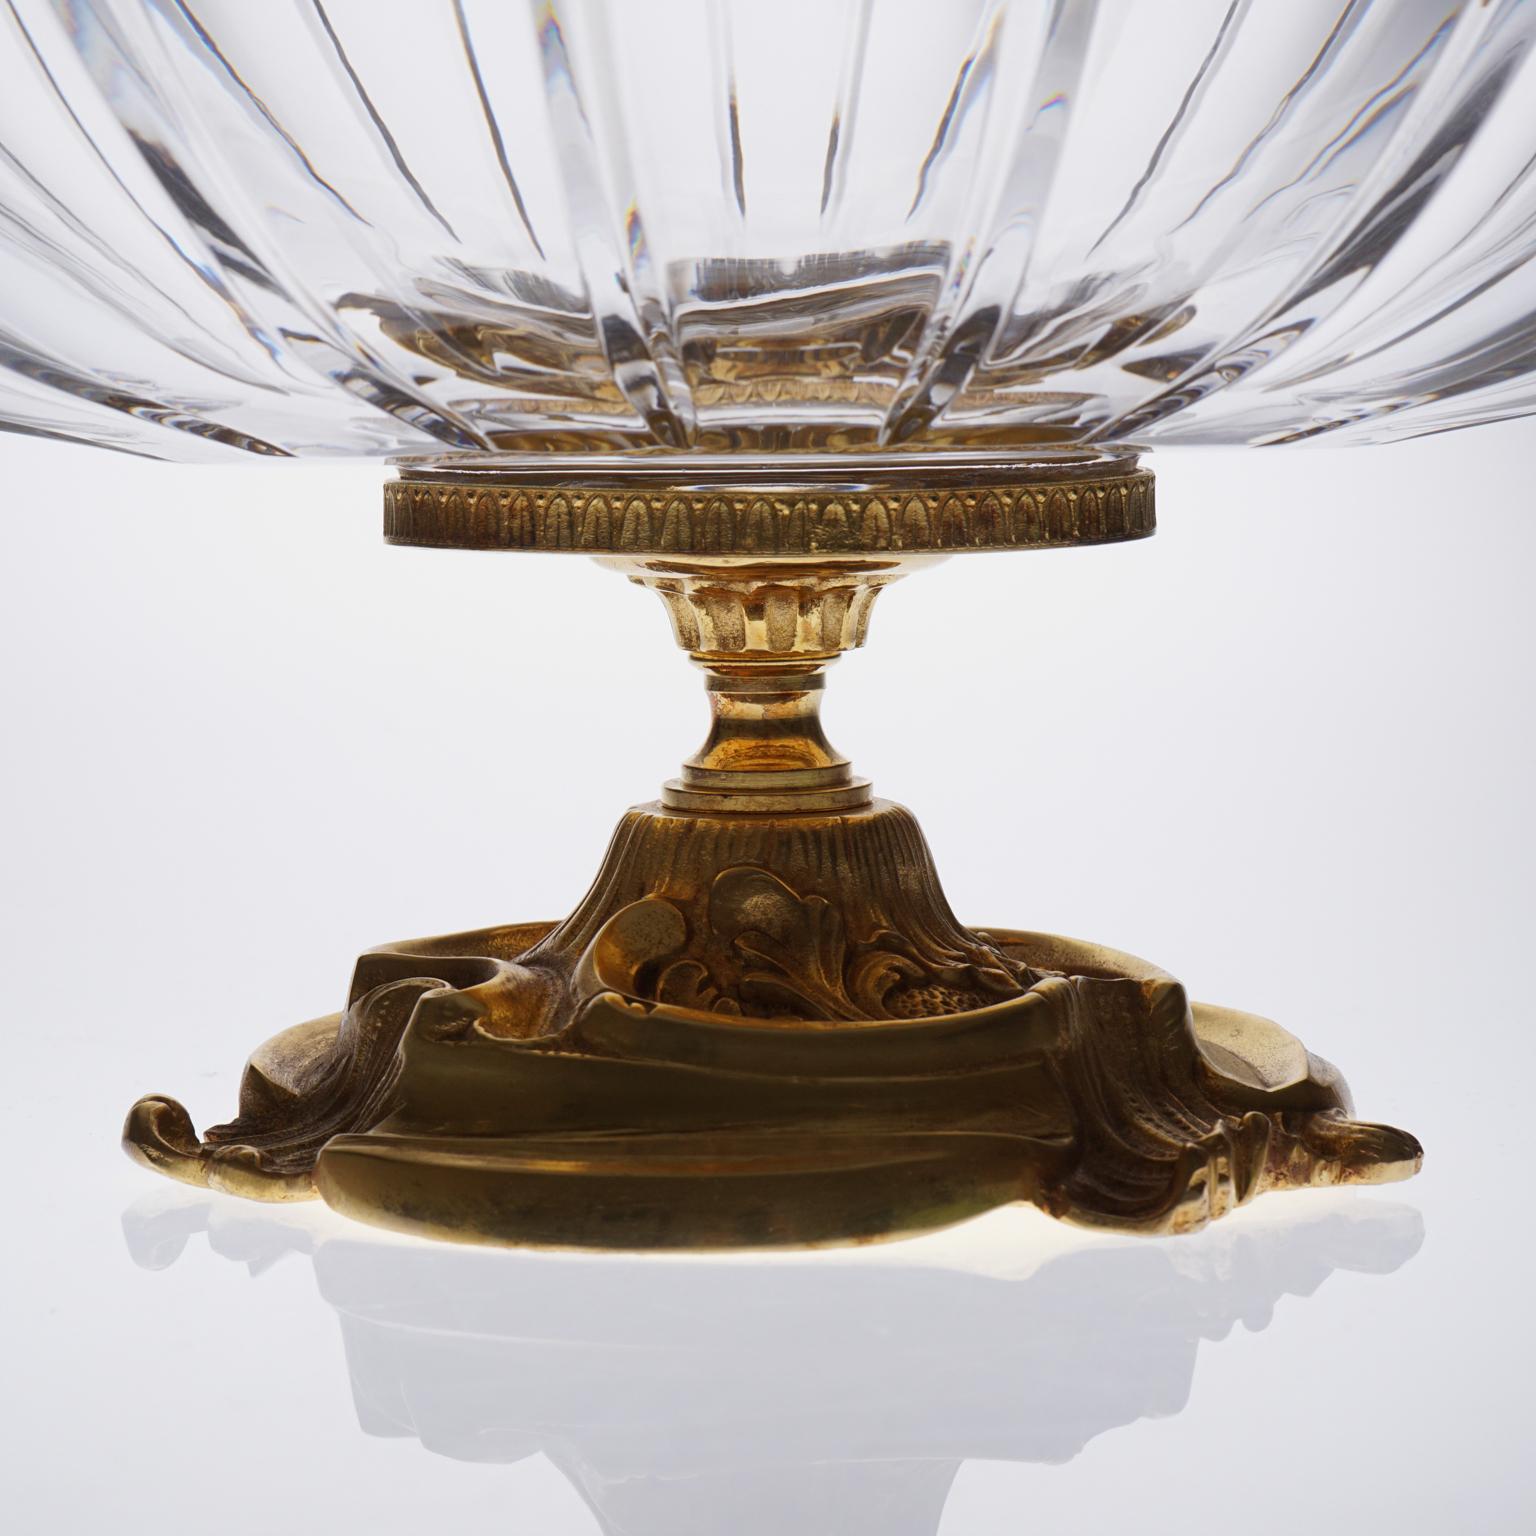 Other Clear Crystal Jardinière with Bronze Covered 22-Carat Gold, Horses Details For Sale